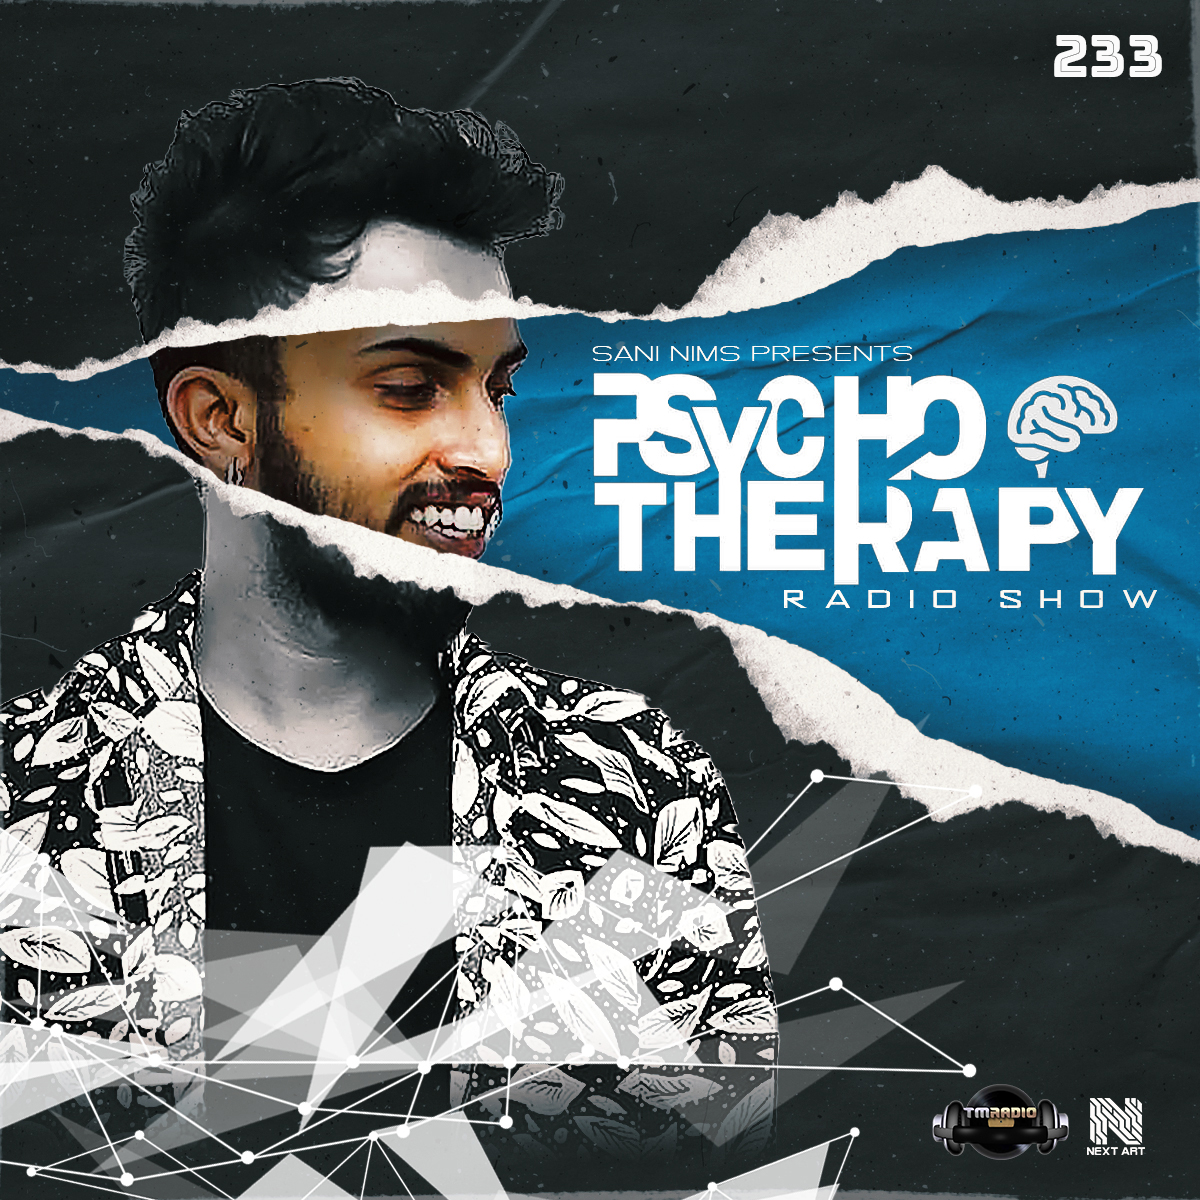 PSYCHO THERAPY EP 233 BY SANI NIMS ON TM RADIO (from March 22nd, 2023)